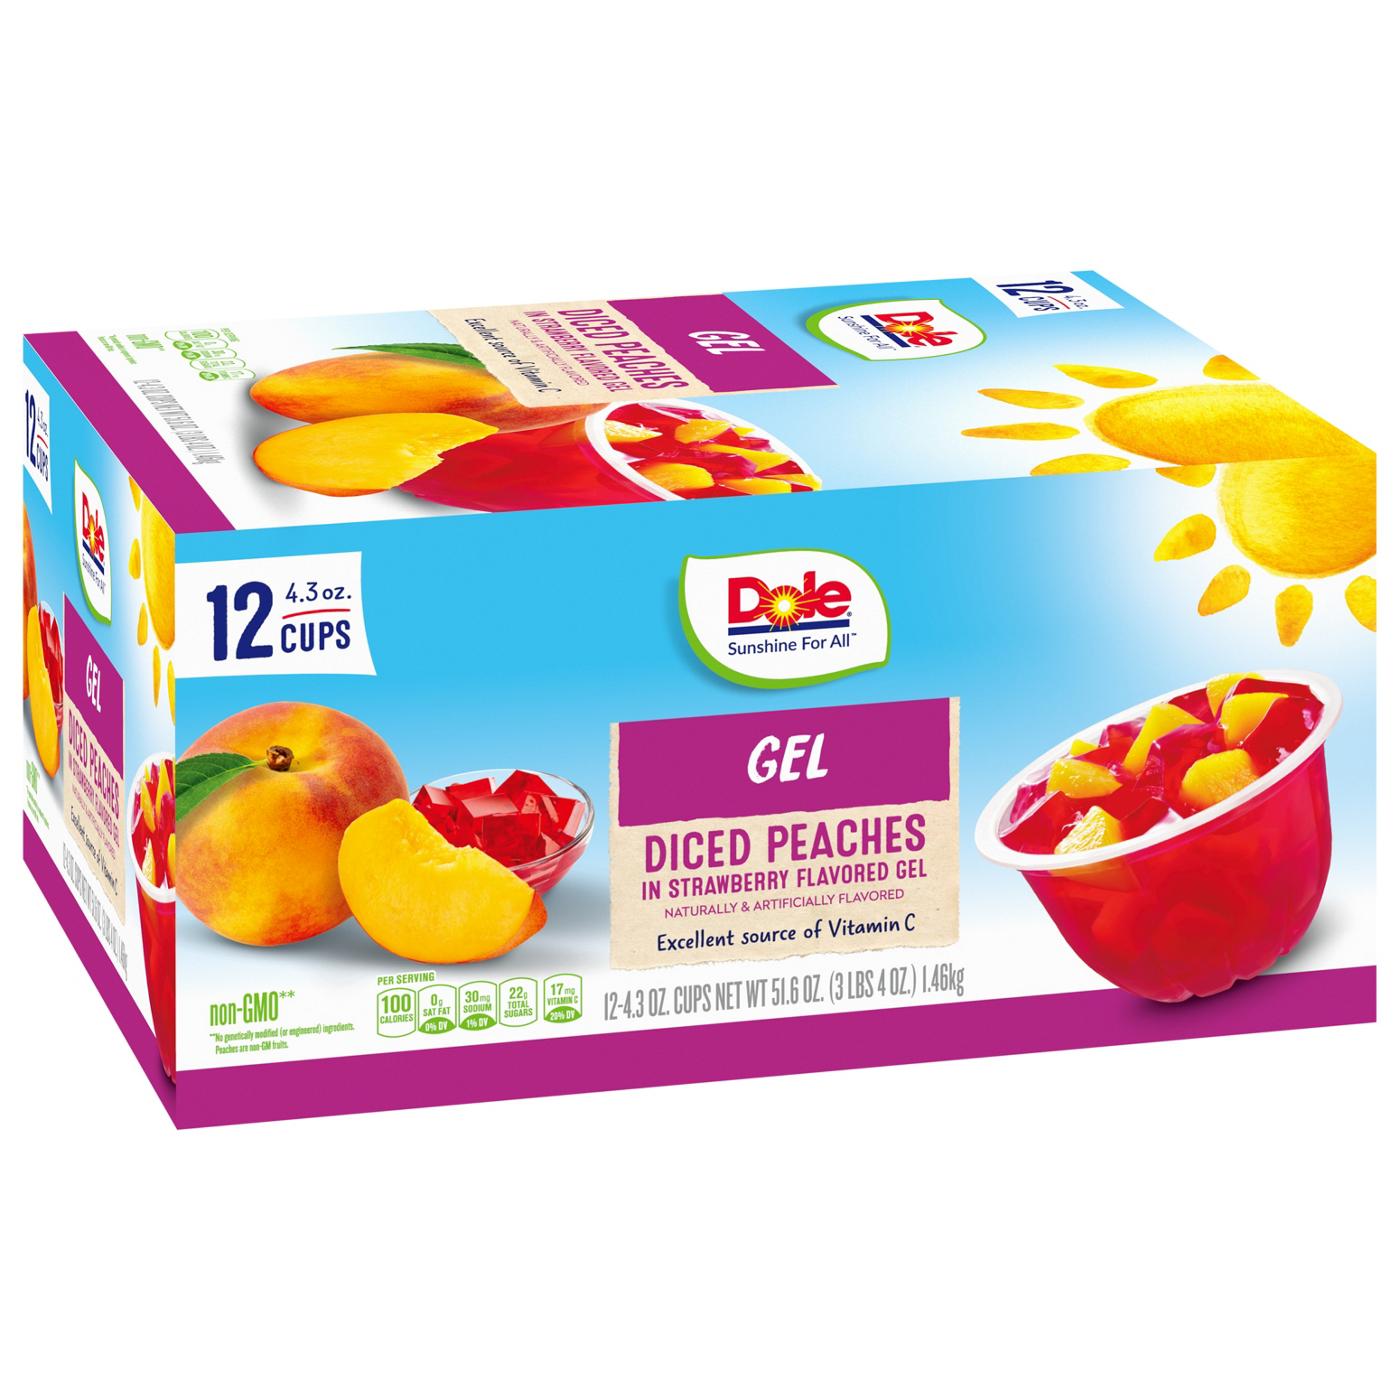 Dole Fruit Bowls - Diced Peaches in Strawberry Flavored Gel; image 3 of 7